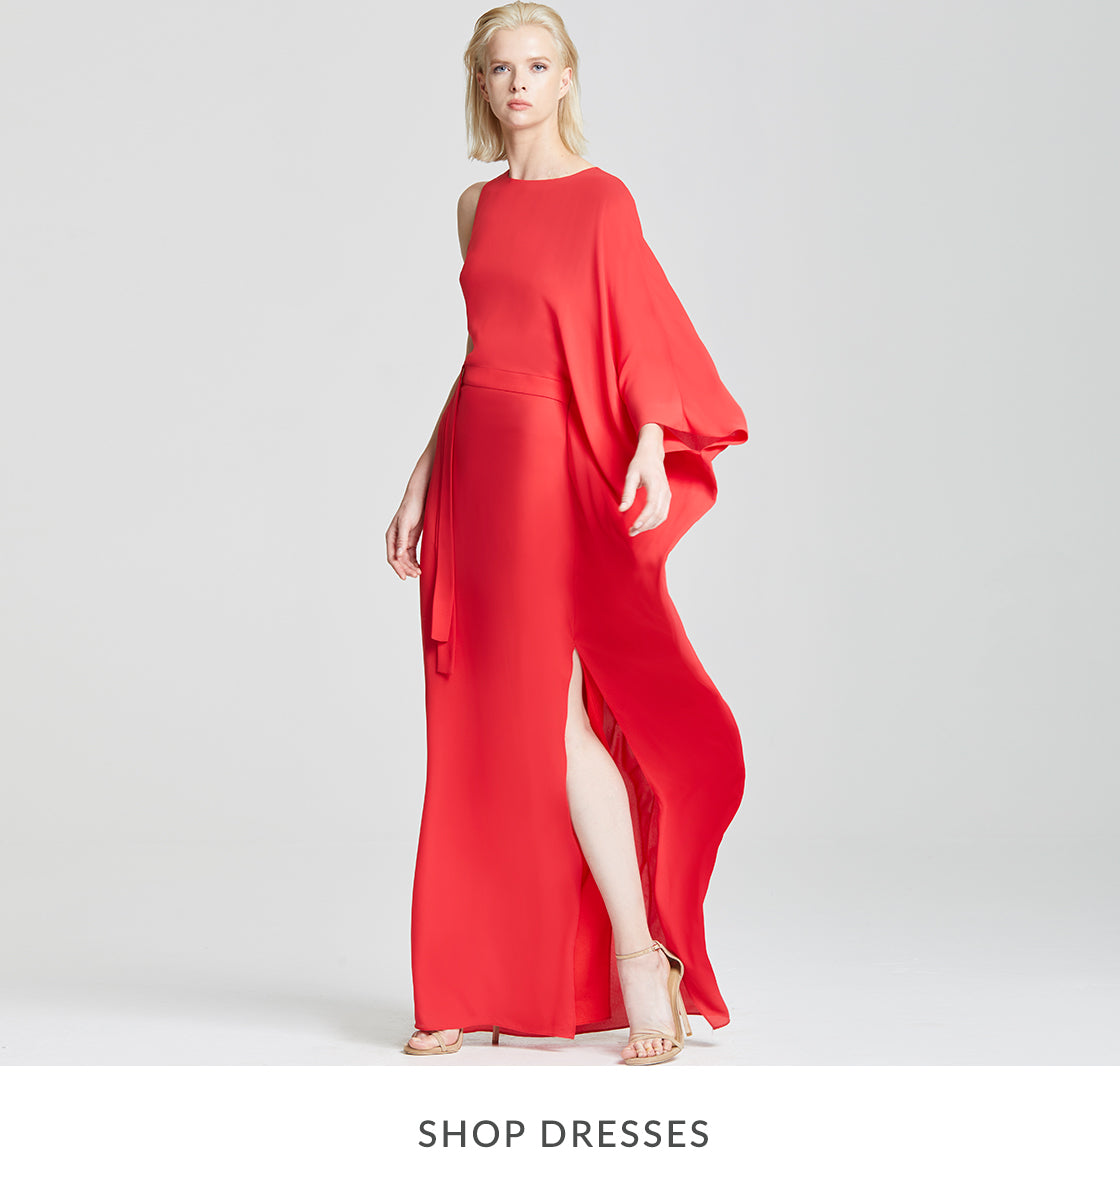 Halston | Official Website & Online Store | Shop The New Collection